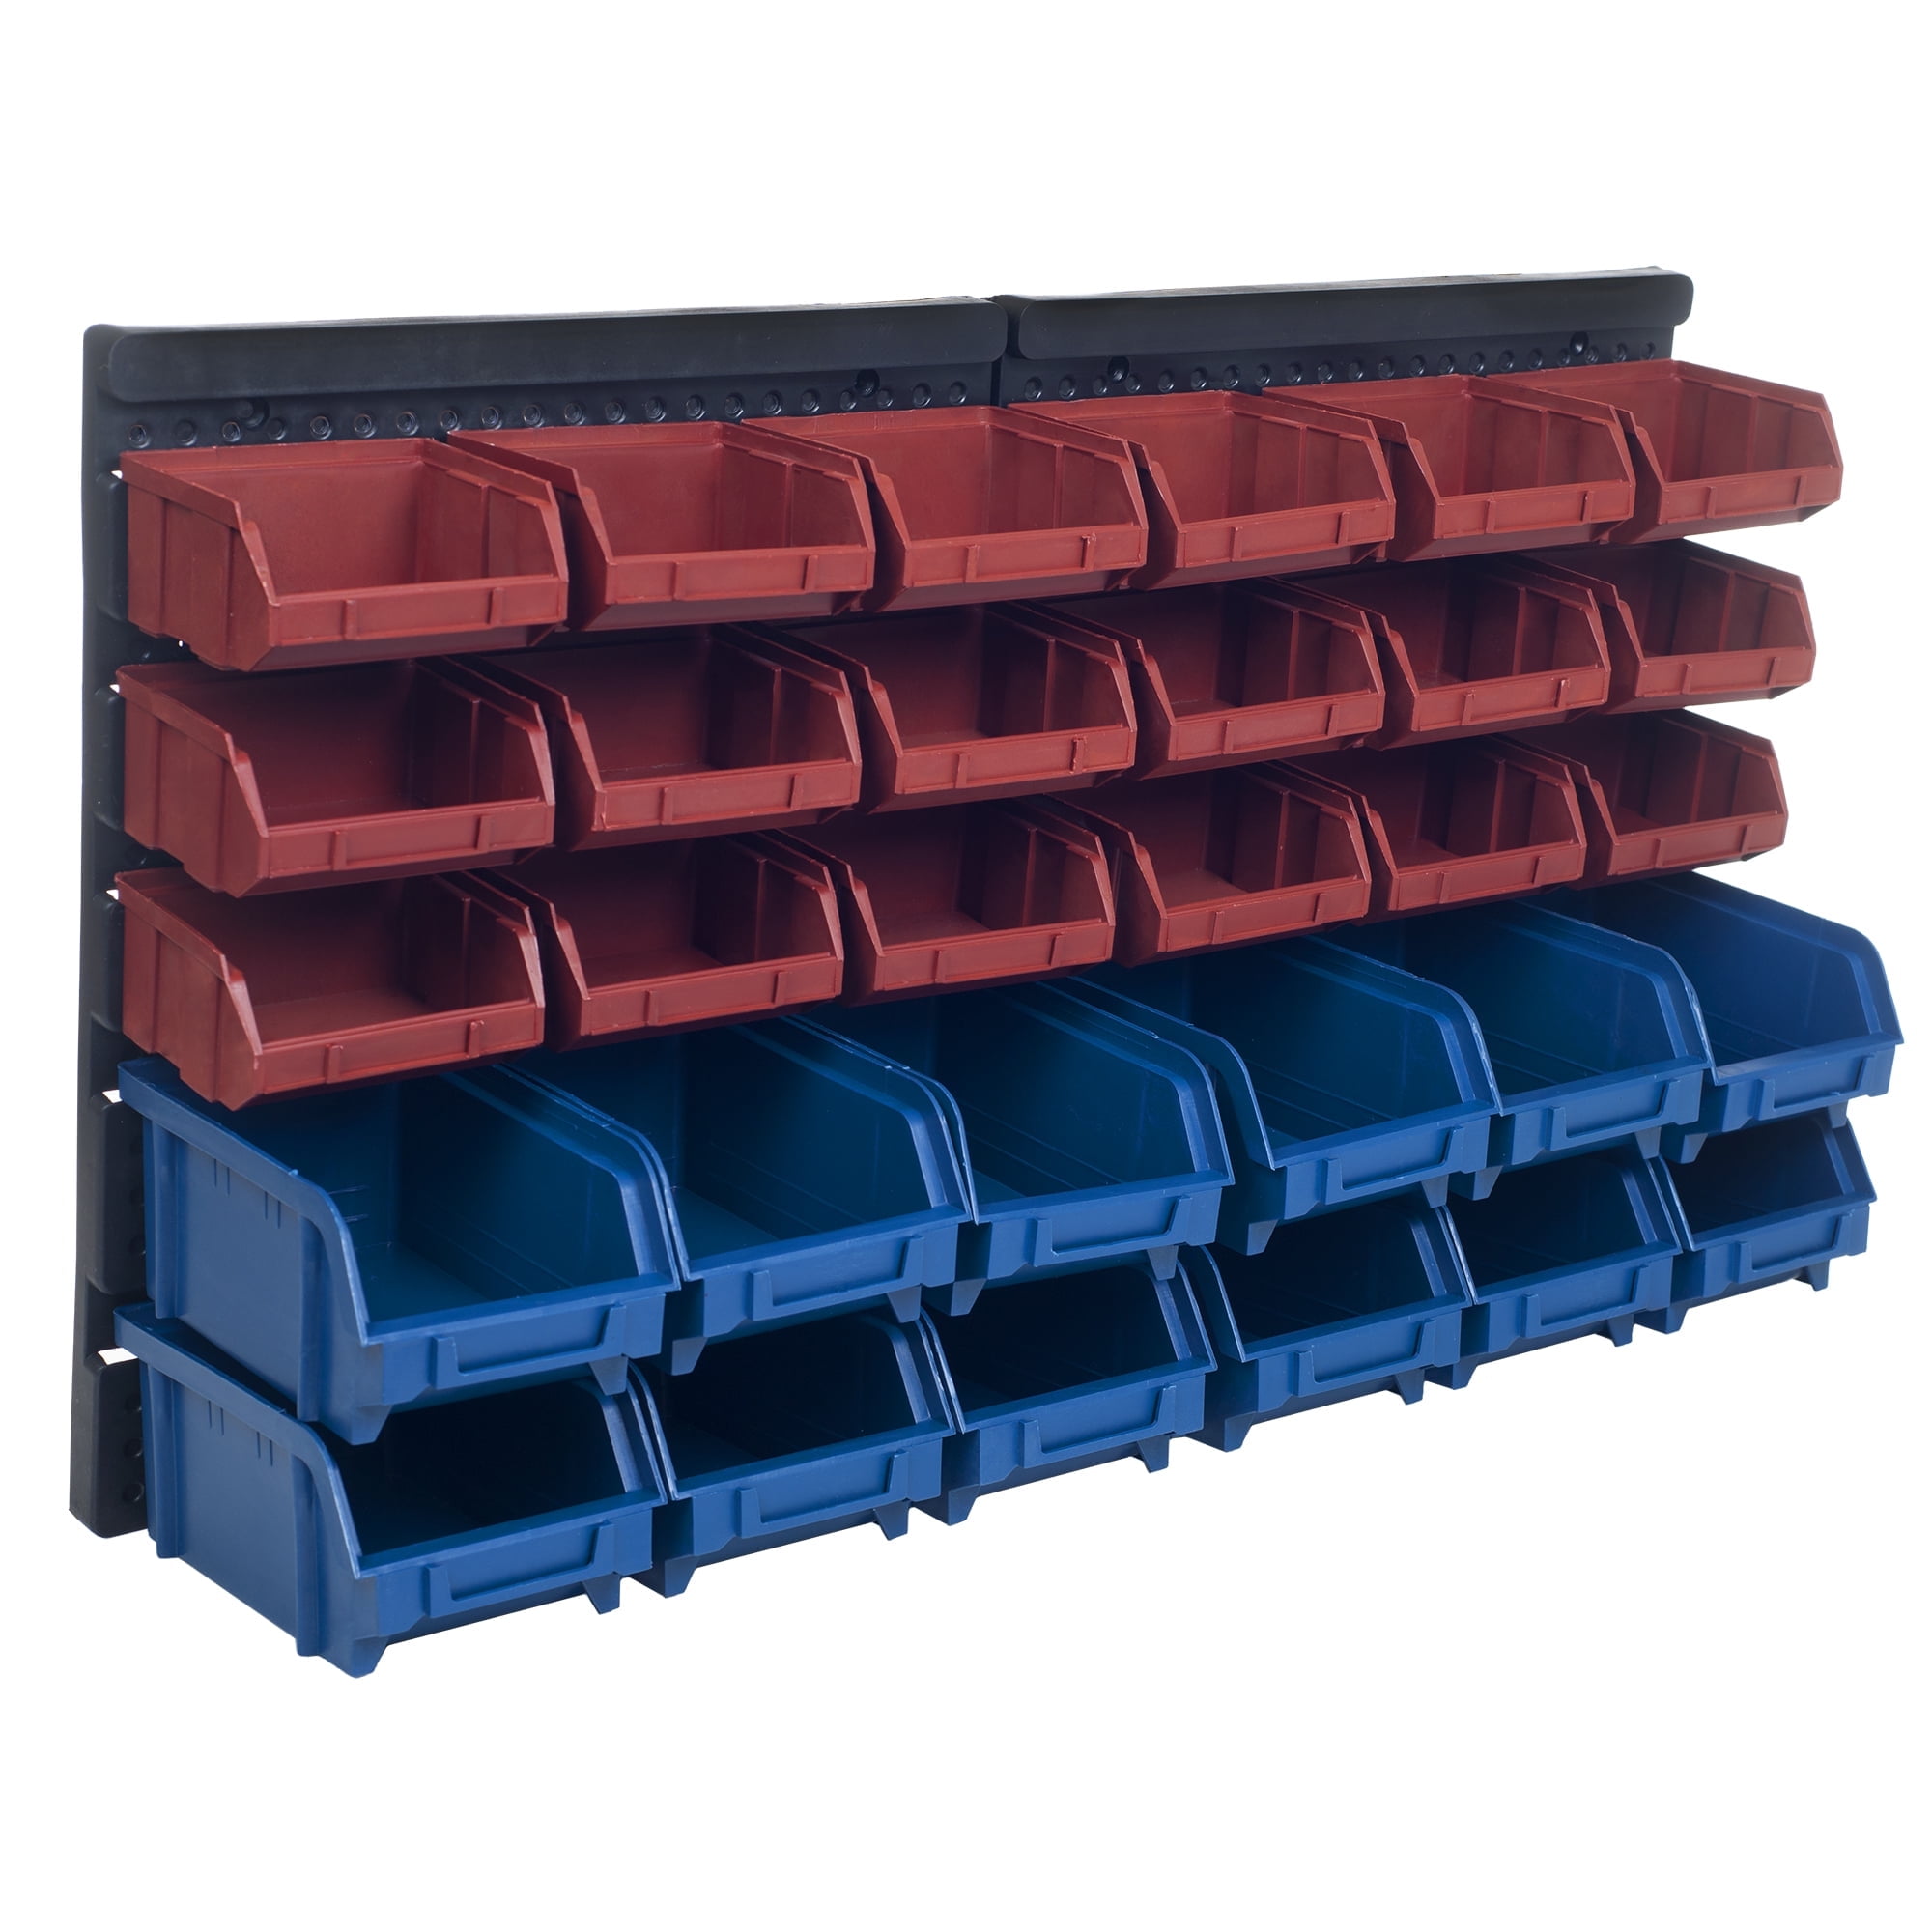 Stalwart 47 Bin Tool Organizer - Wall Mountable Container for